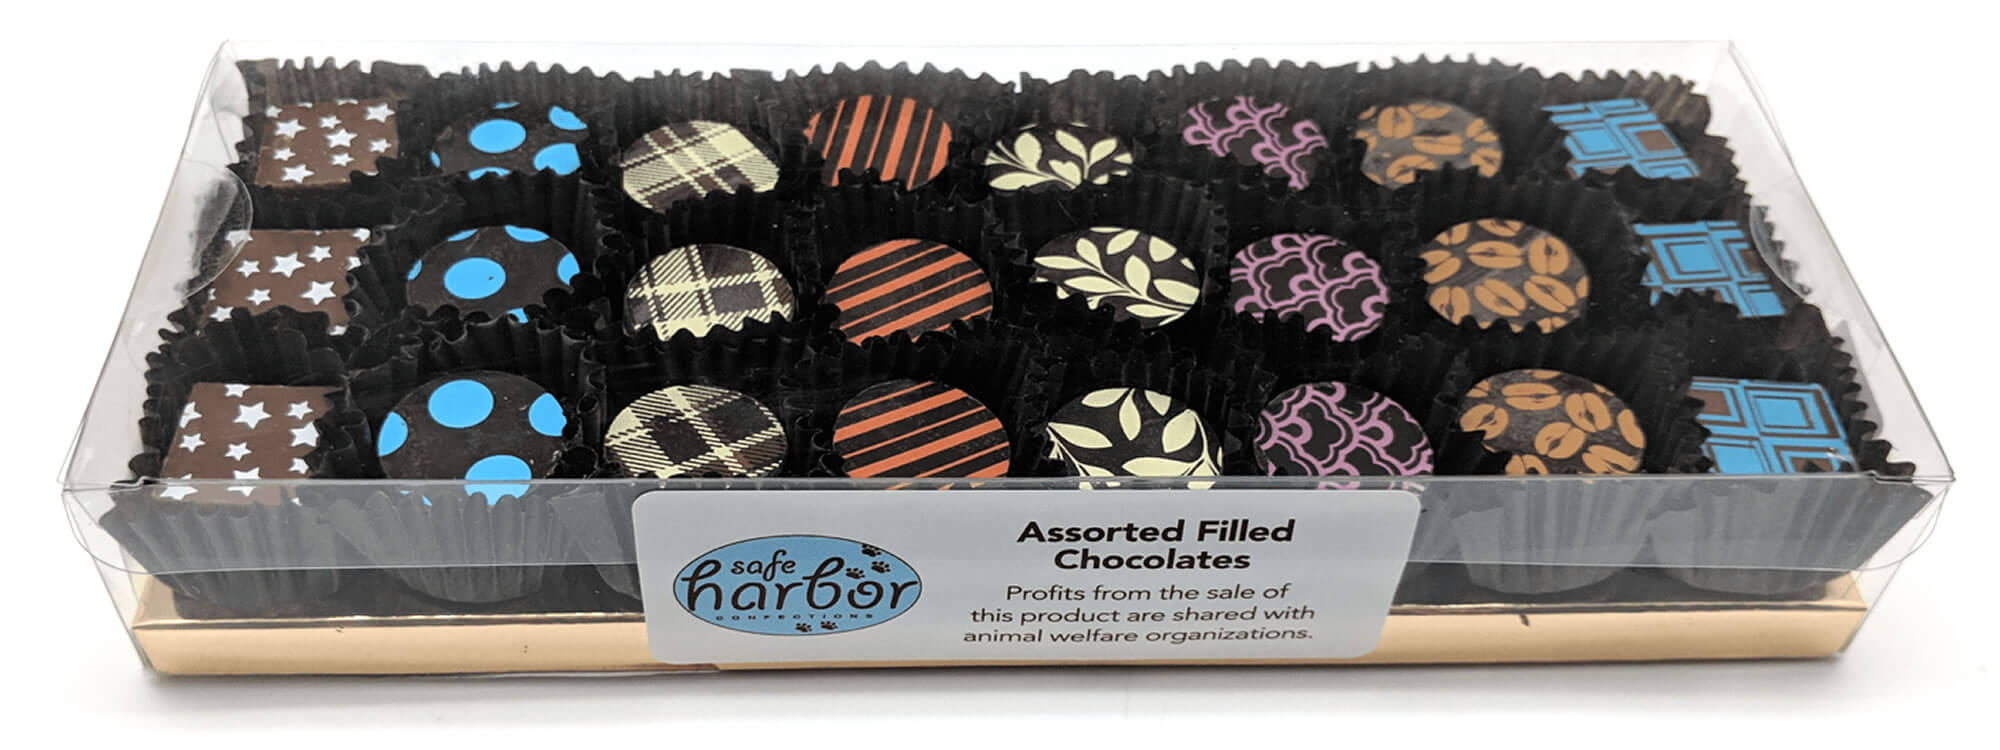 Assorted filled chocolates created by Safe Harbor Confections.